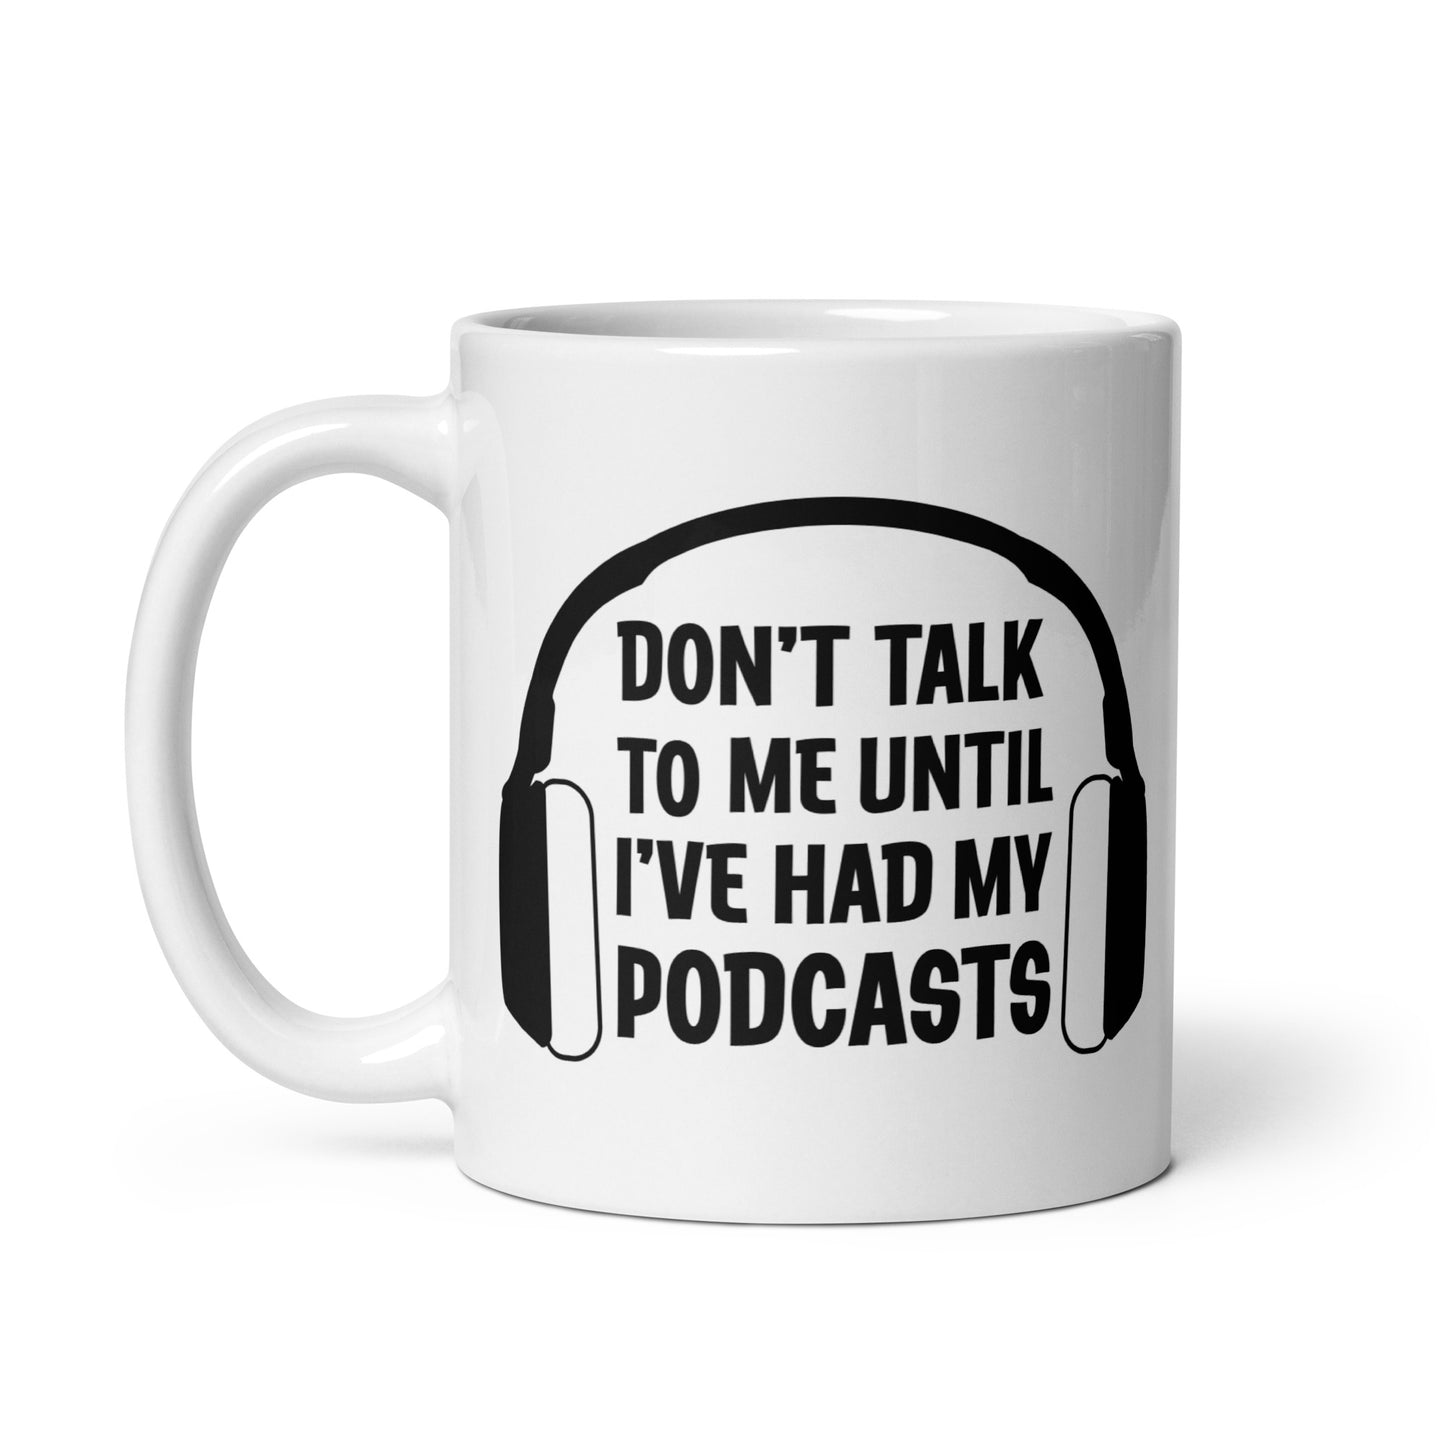 A white 11 ounce ceramic coffee mug featuring an image of headphones surrounding text reading "Don't talk to me until I've had my podcasts"